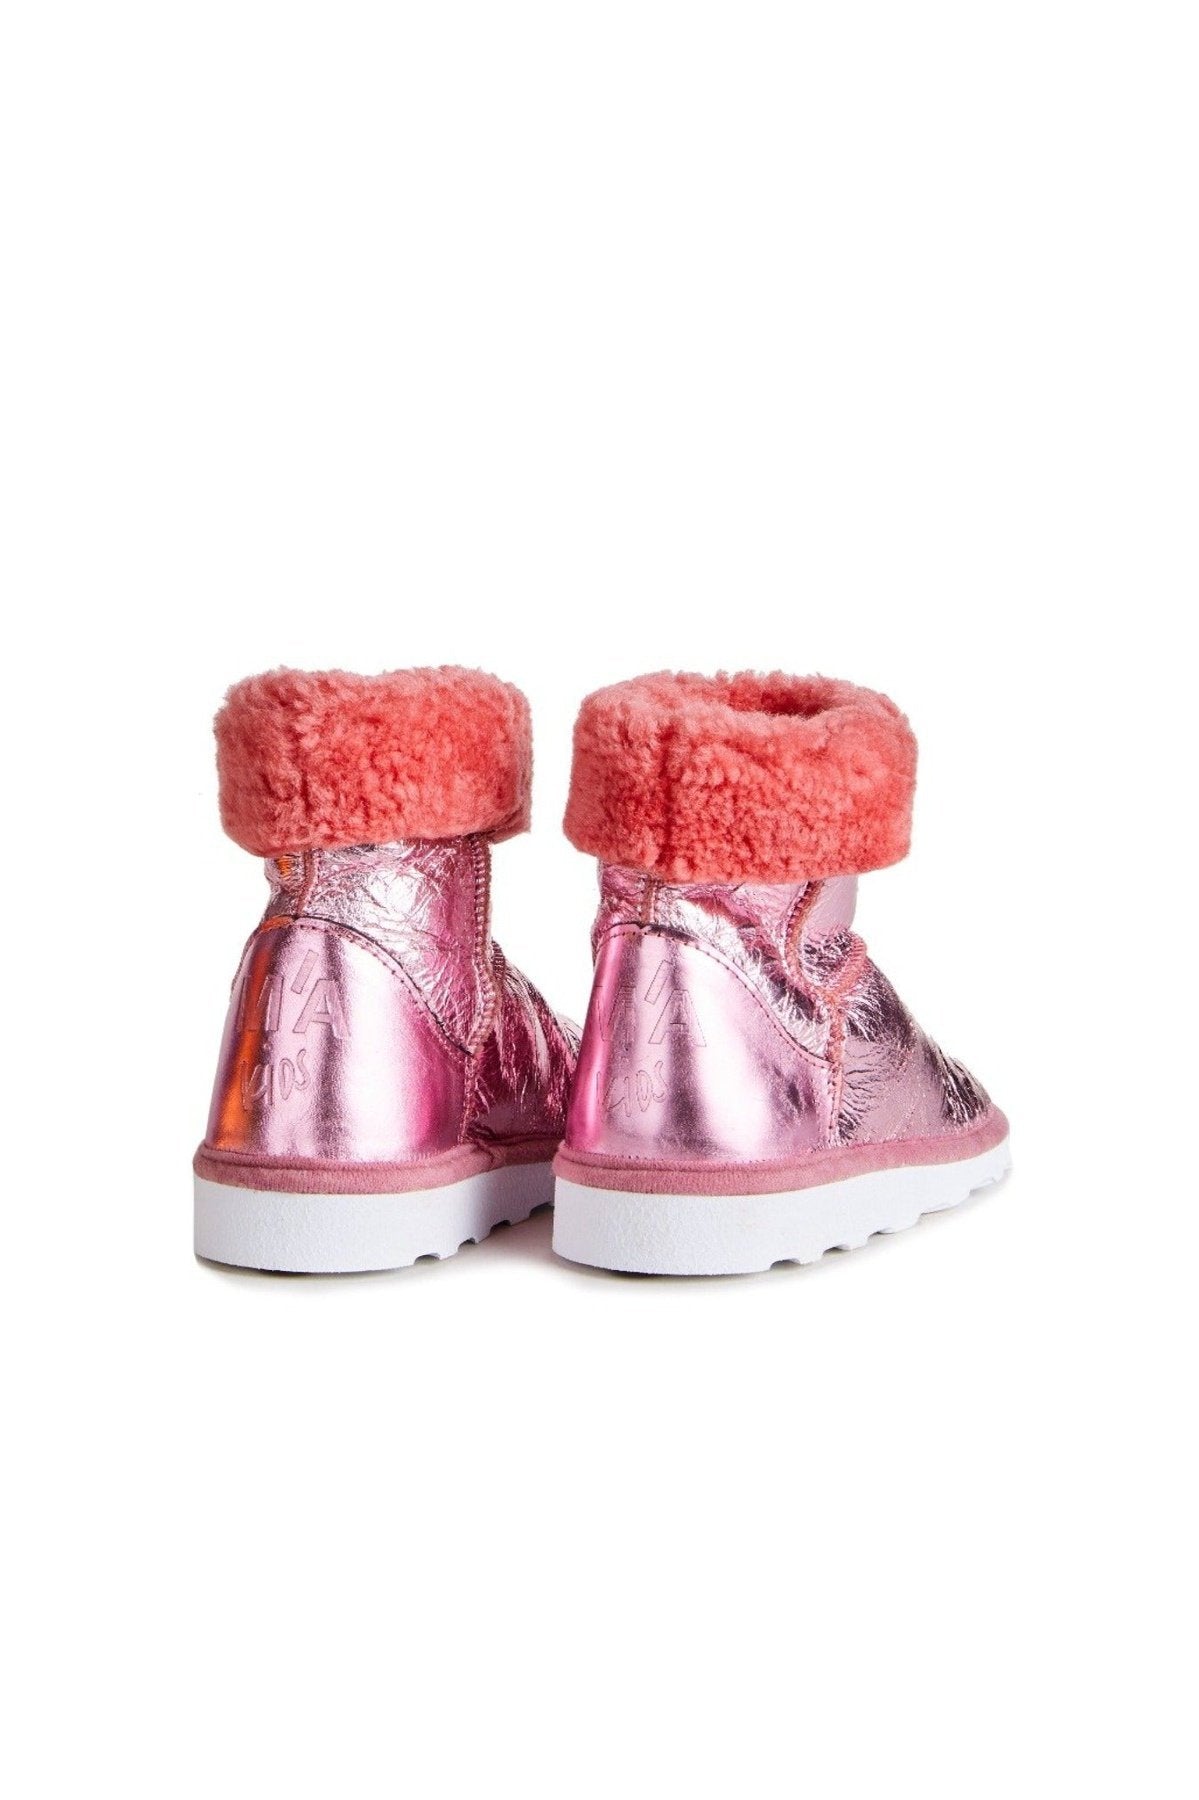 M'A KIDS LEATHER BOOTS IN PINK